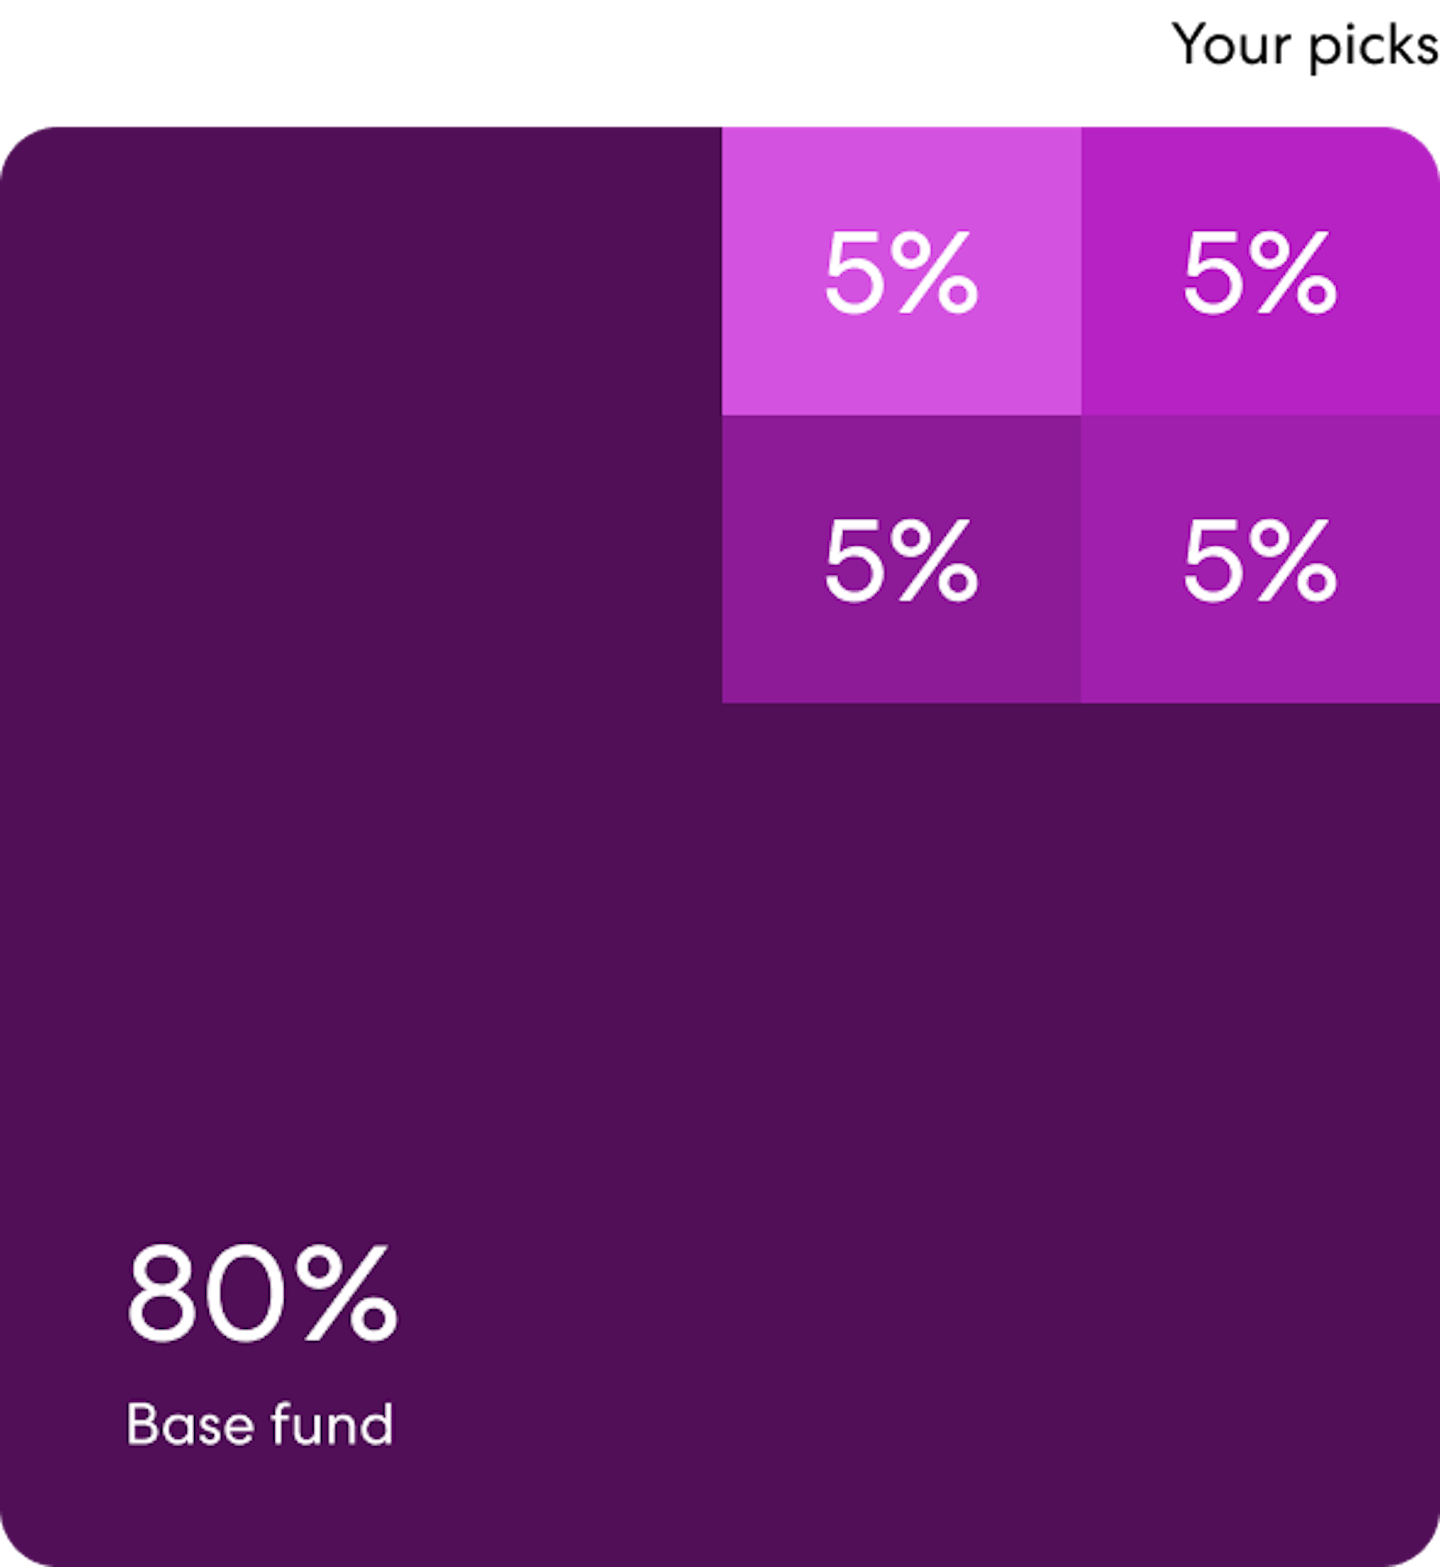 A square representing an investment plan is mostly dark purple with "80% Base fund" in the bottom left corner. The remaining part is made up of 4 smaller squares with "5%" on each, representing the amount allocated into self-select investments.